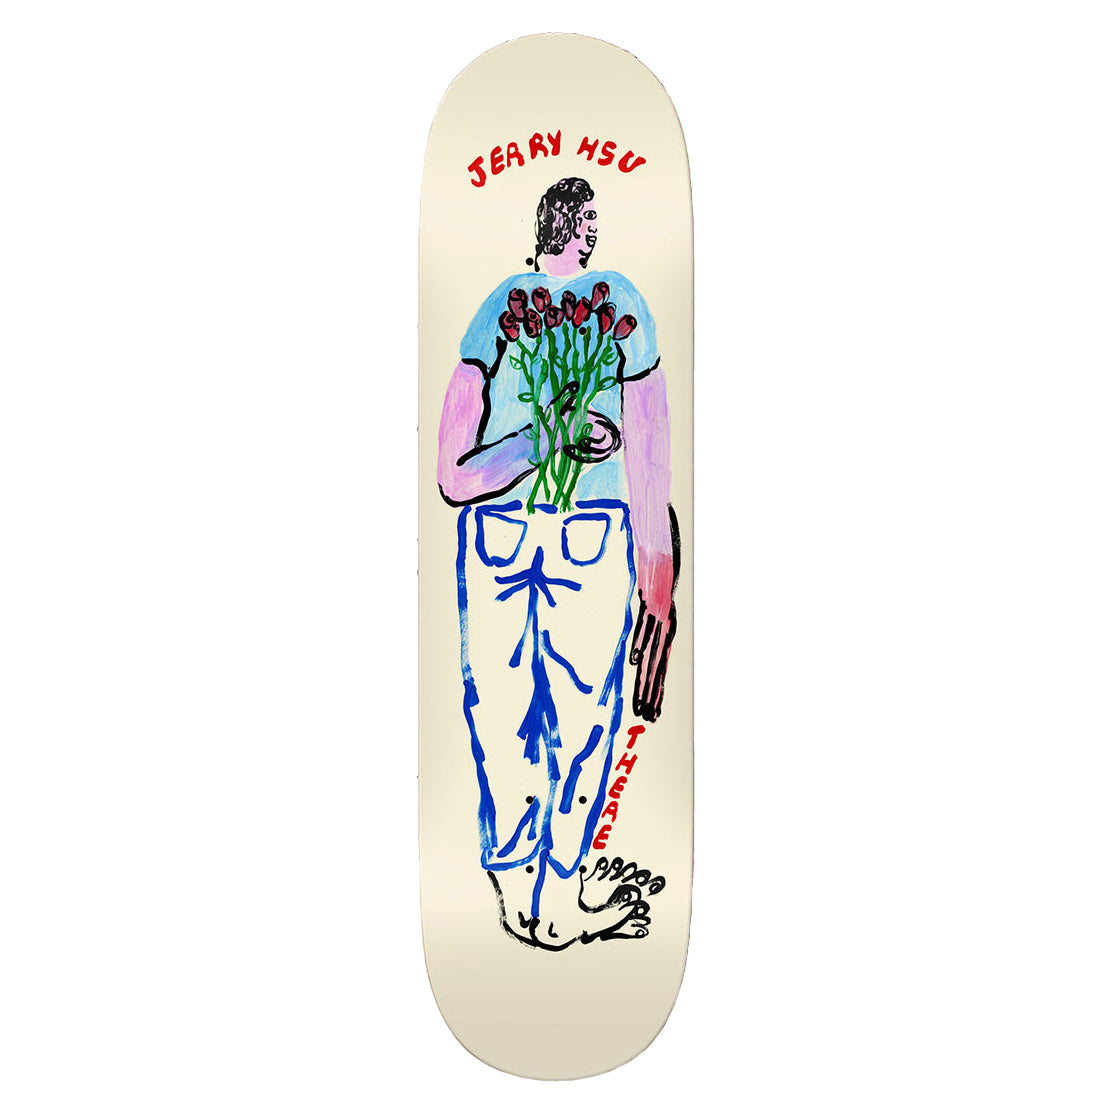 There Jerry Hsu Guest Skateshop Day Deck - 8.25 / 8.5